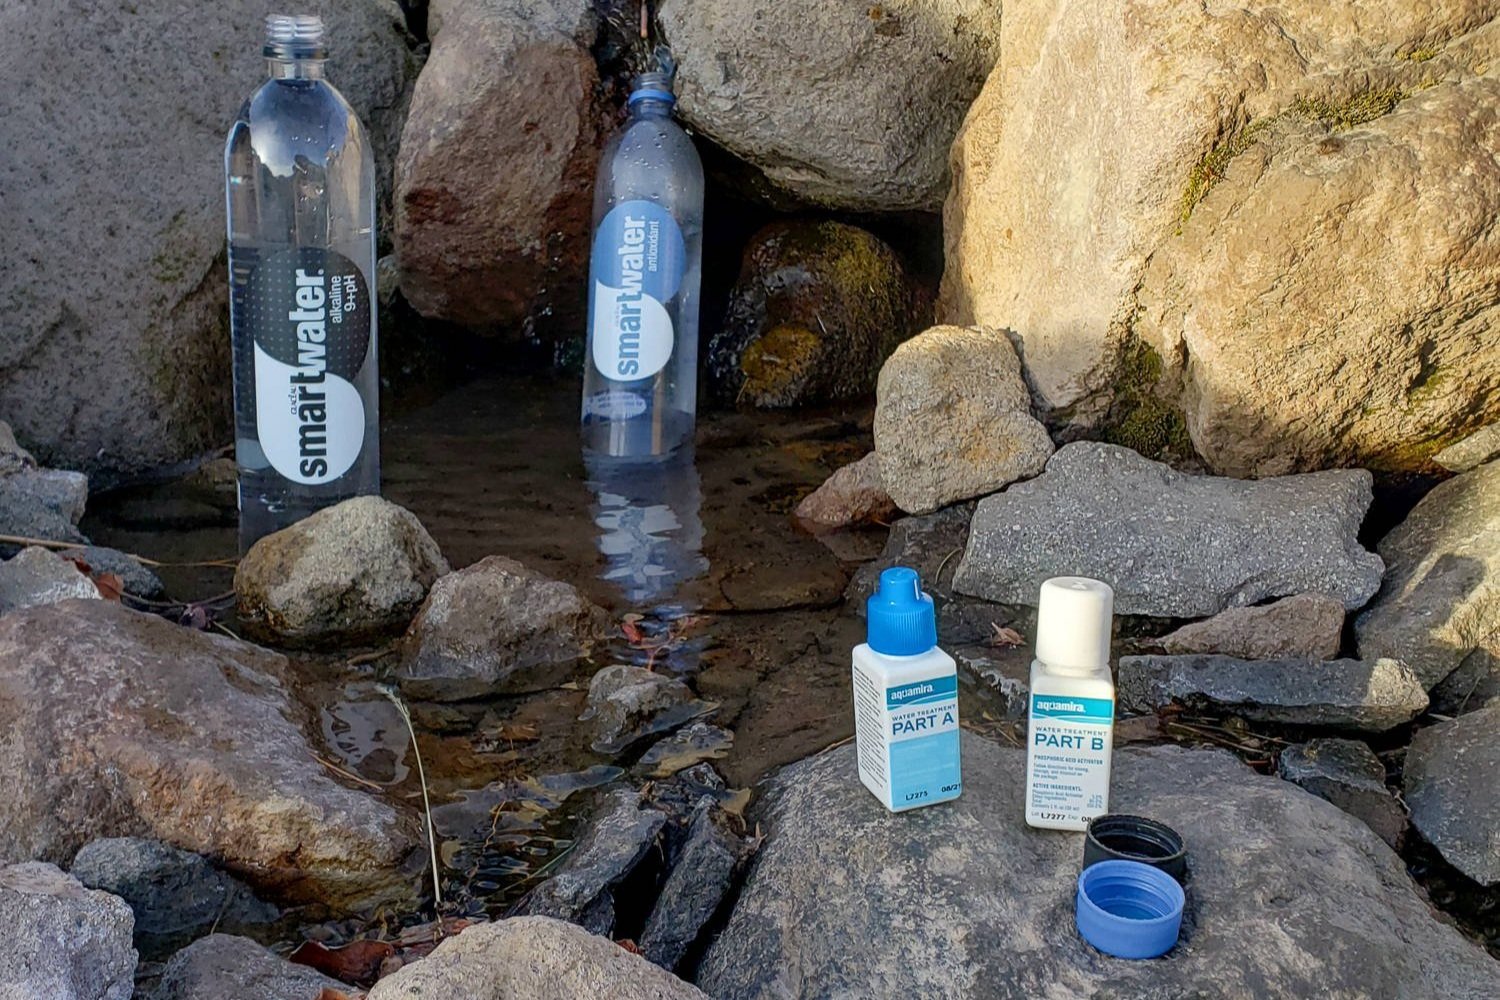 Aquamira bottles sitting on a rock in front of a spring with two water bottles in it